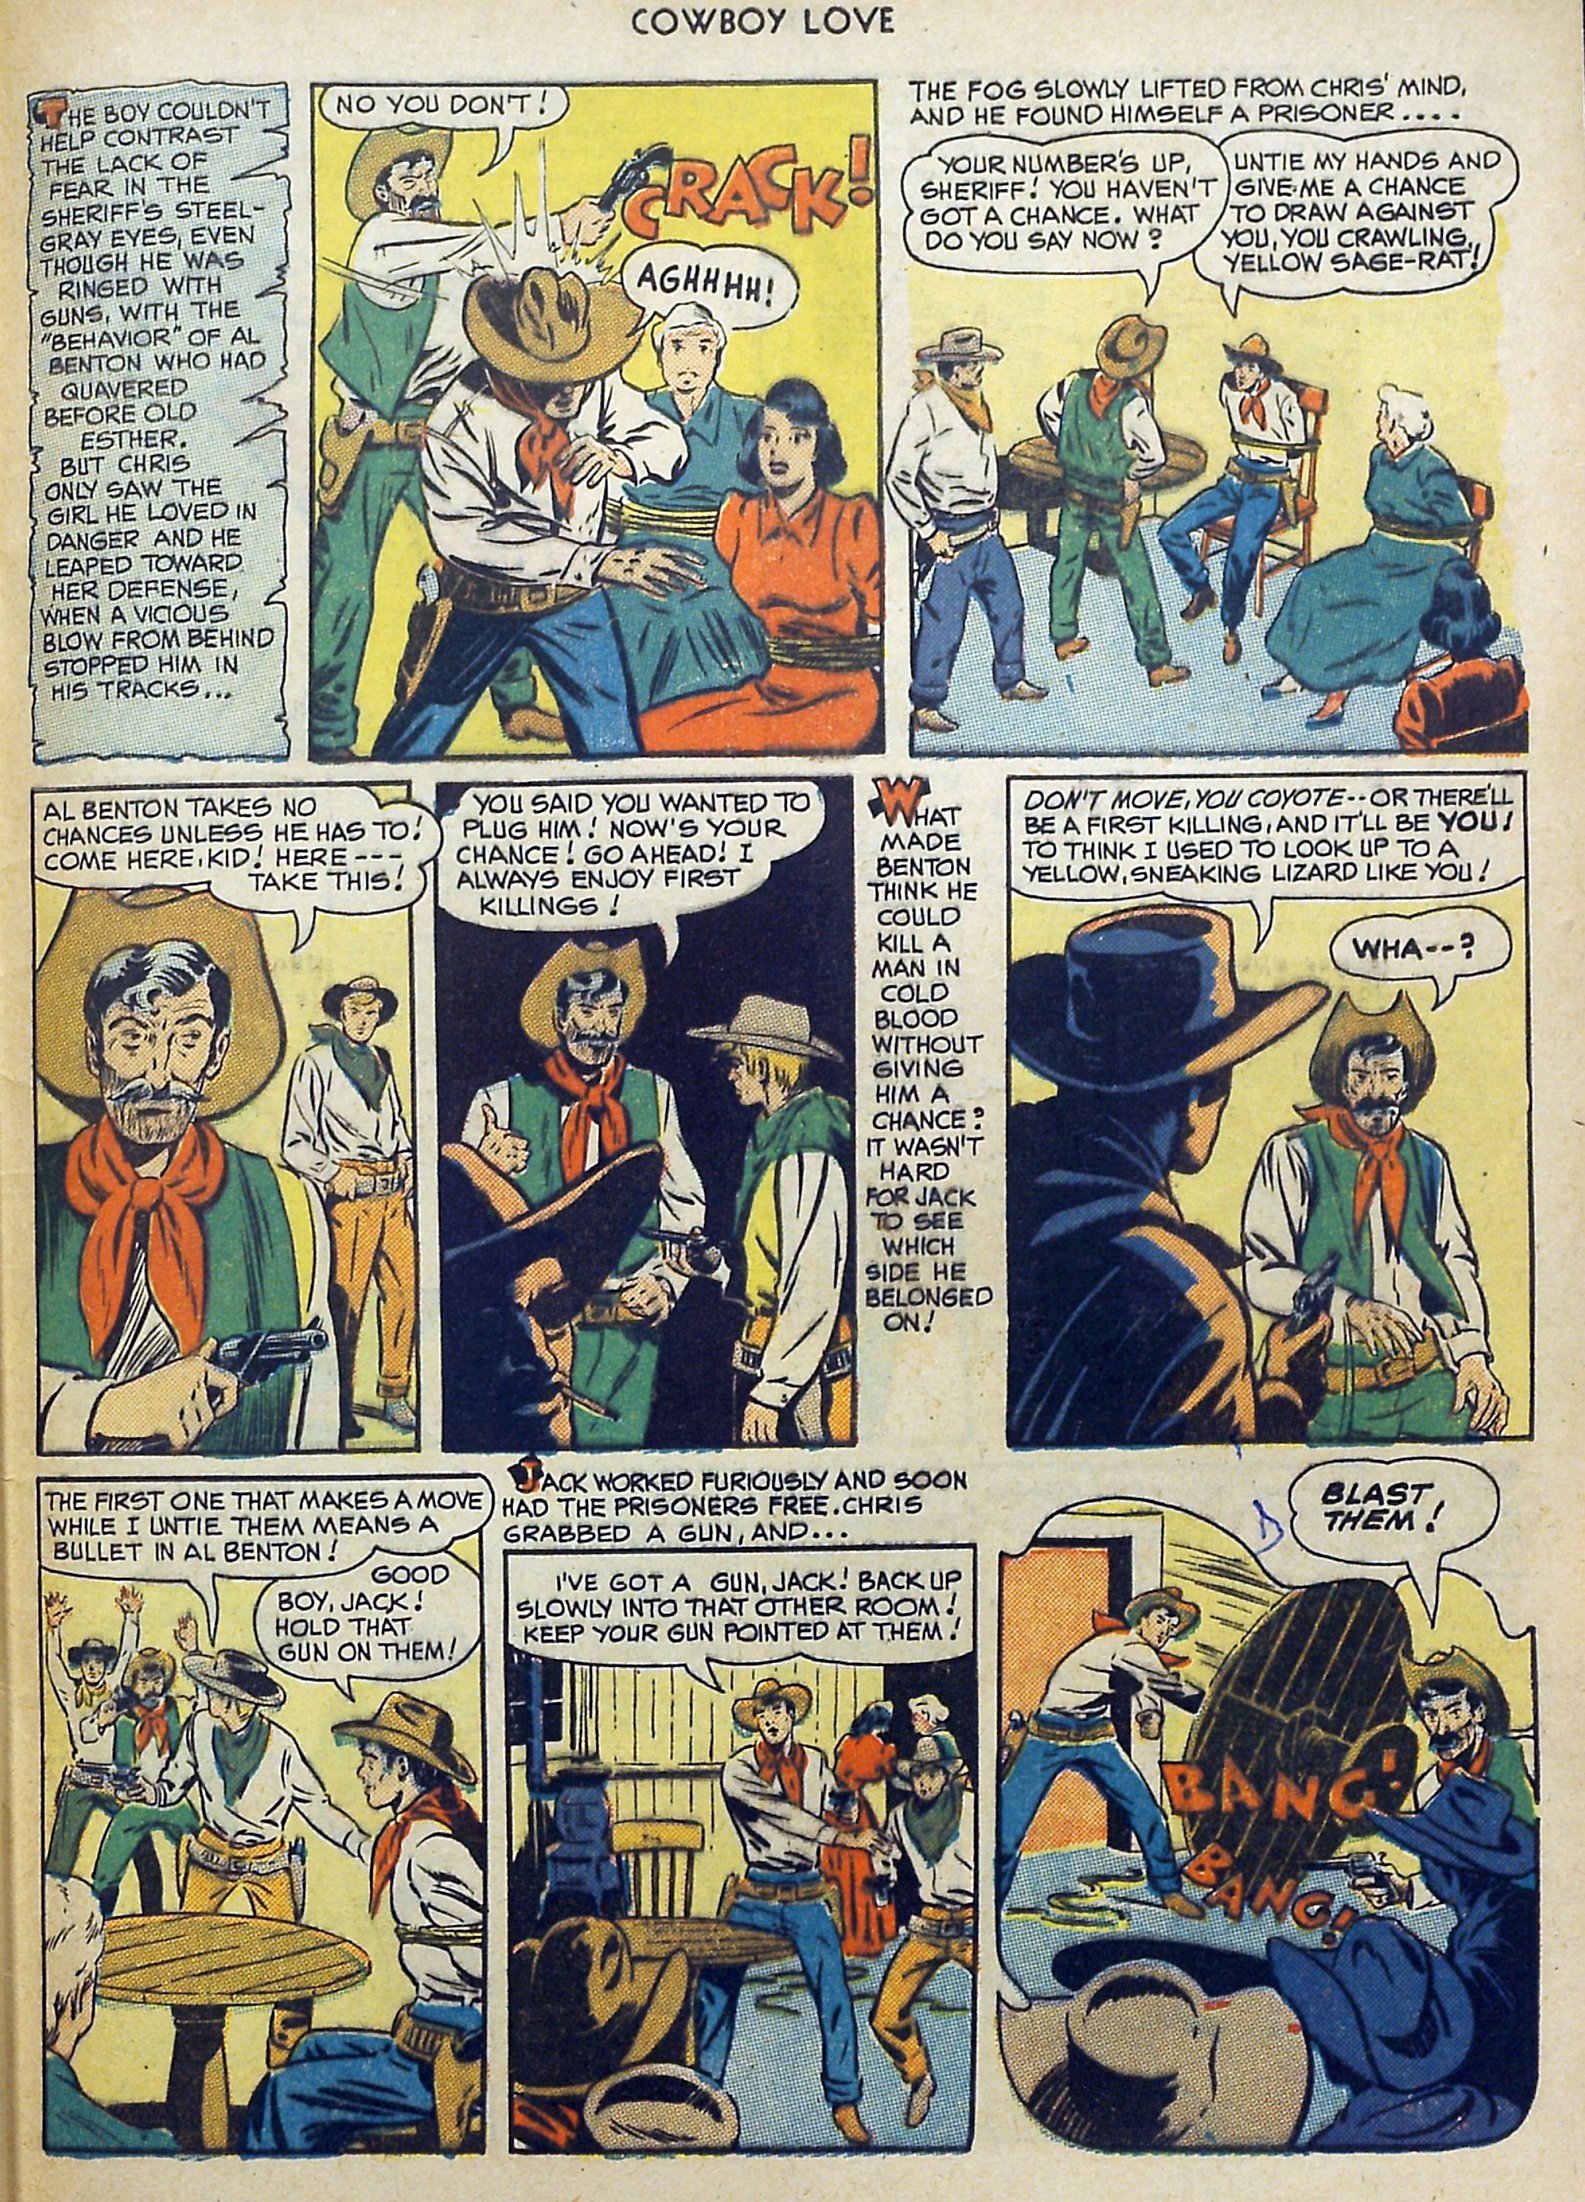 Read online Cowboy Love comic -  Issue #9 - 49